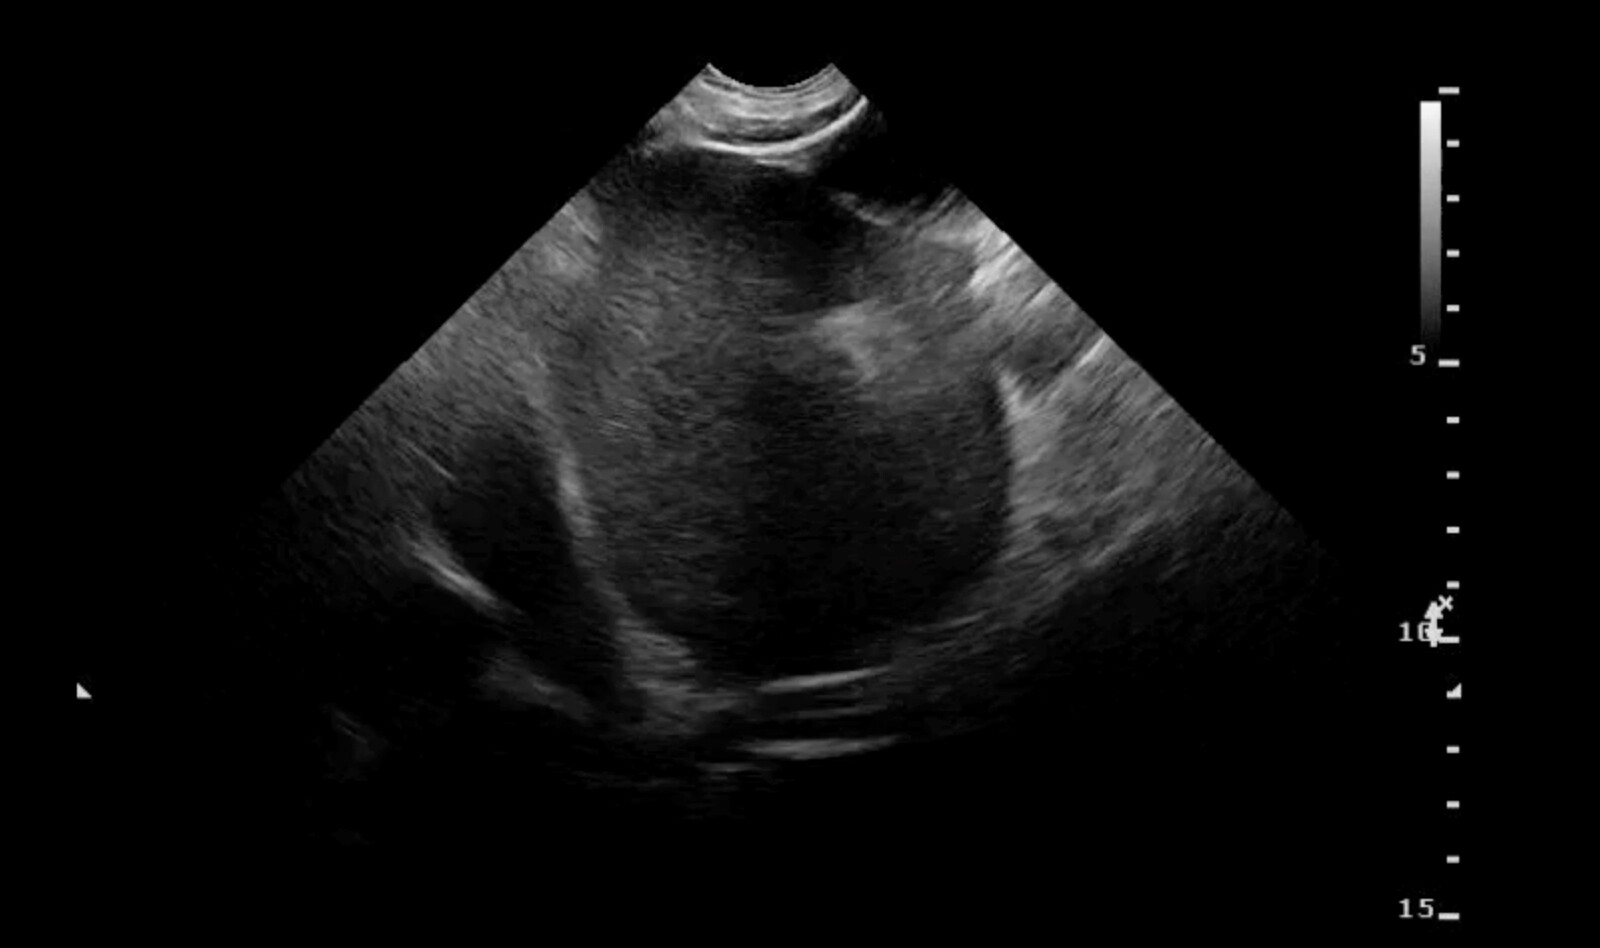 Image of point of care ultrasound point of care ultrasound emergency ultrasound    Online PoCUS Training